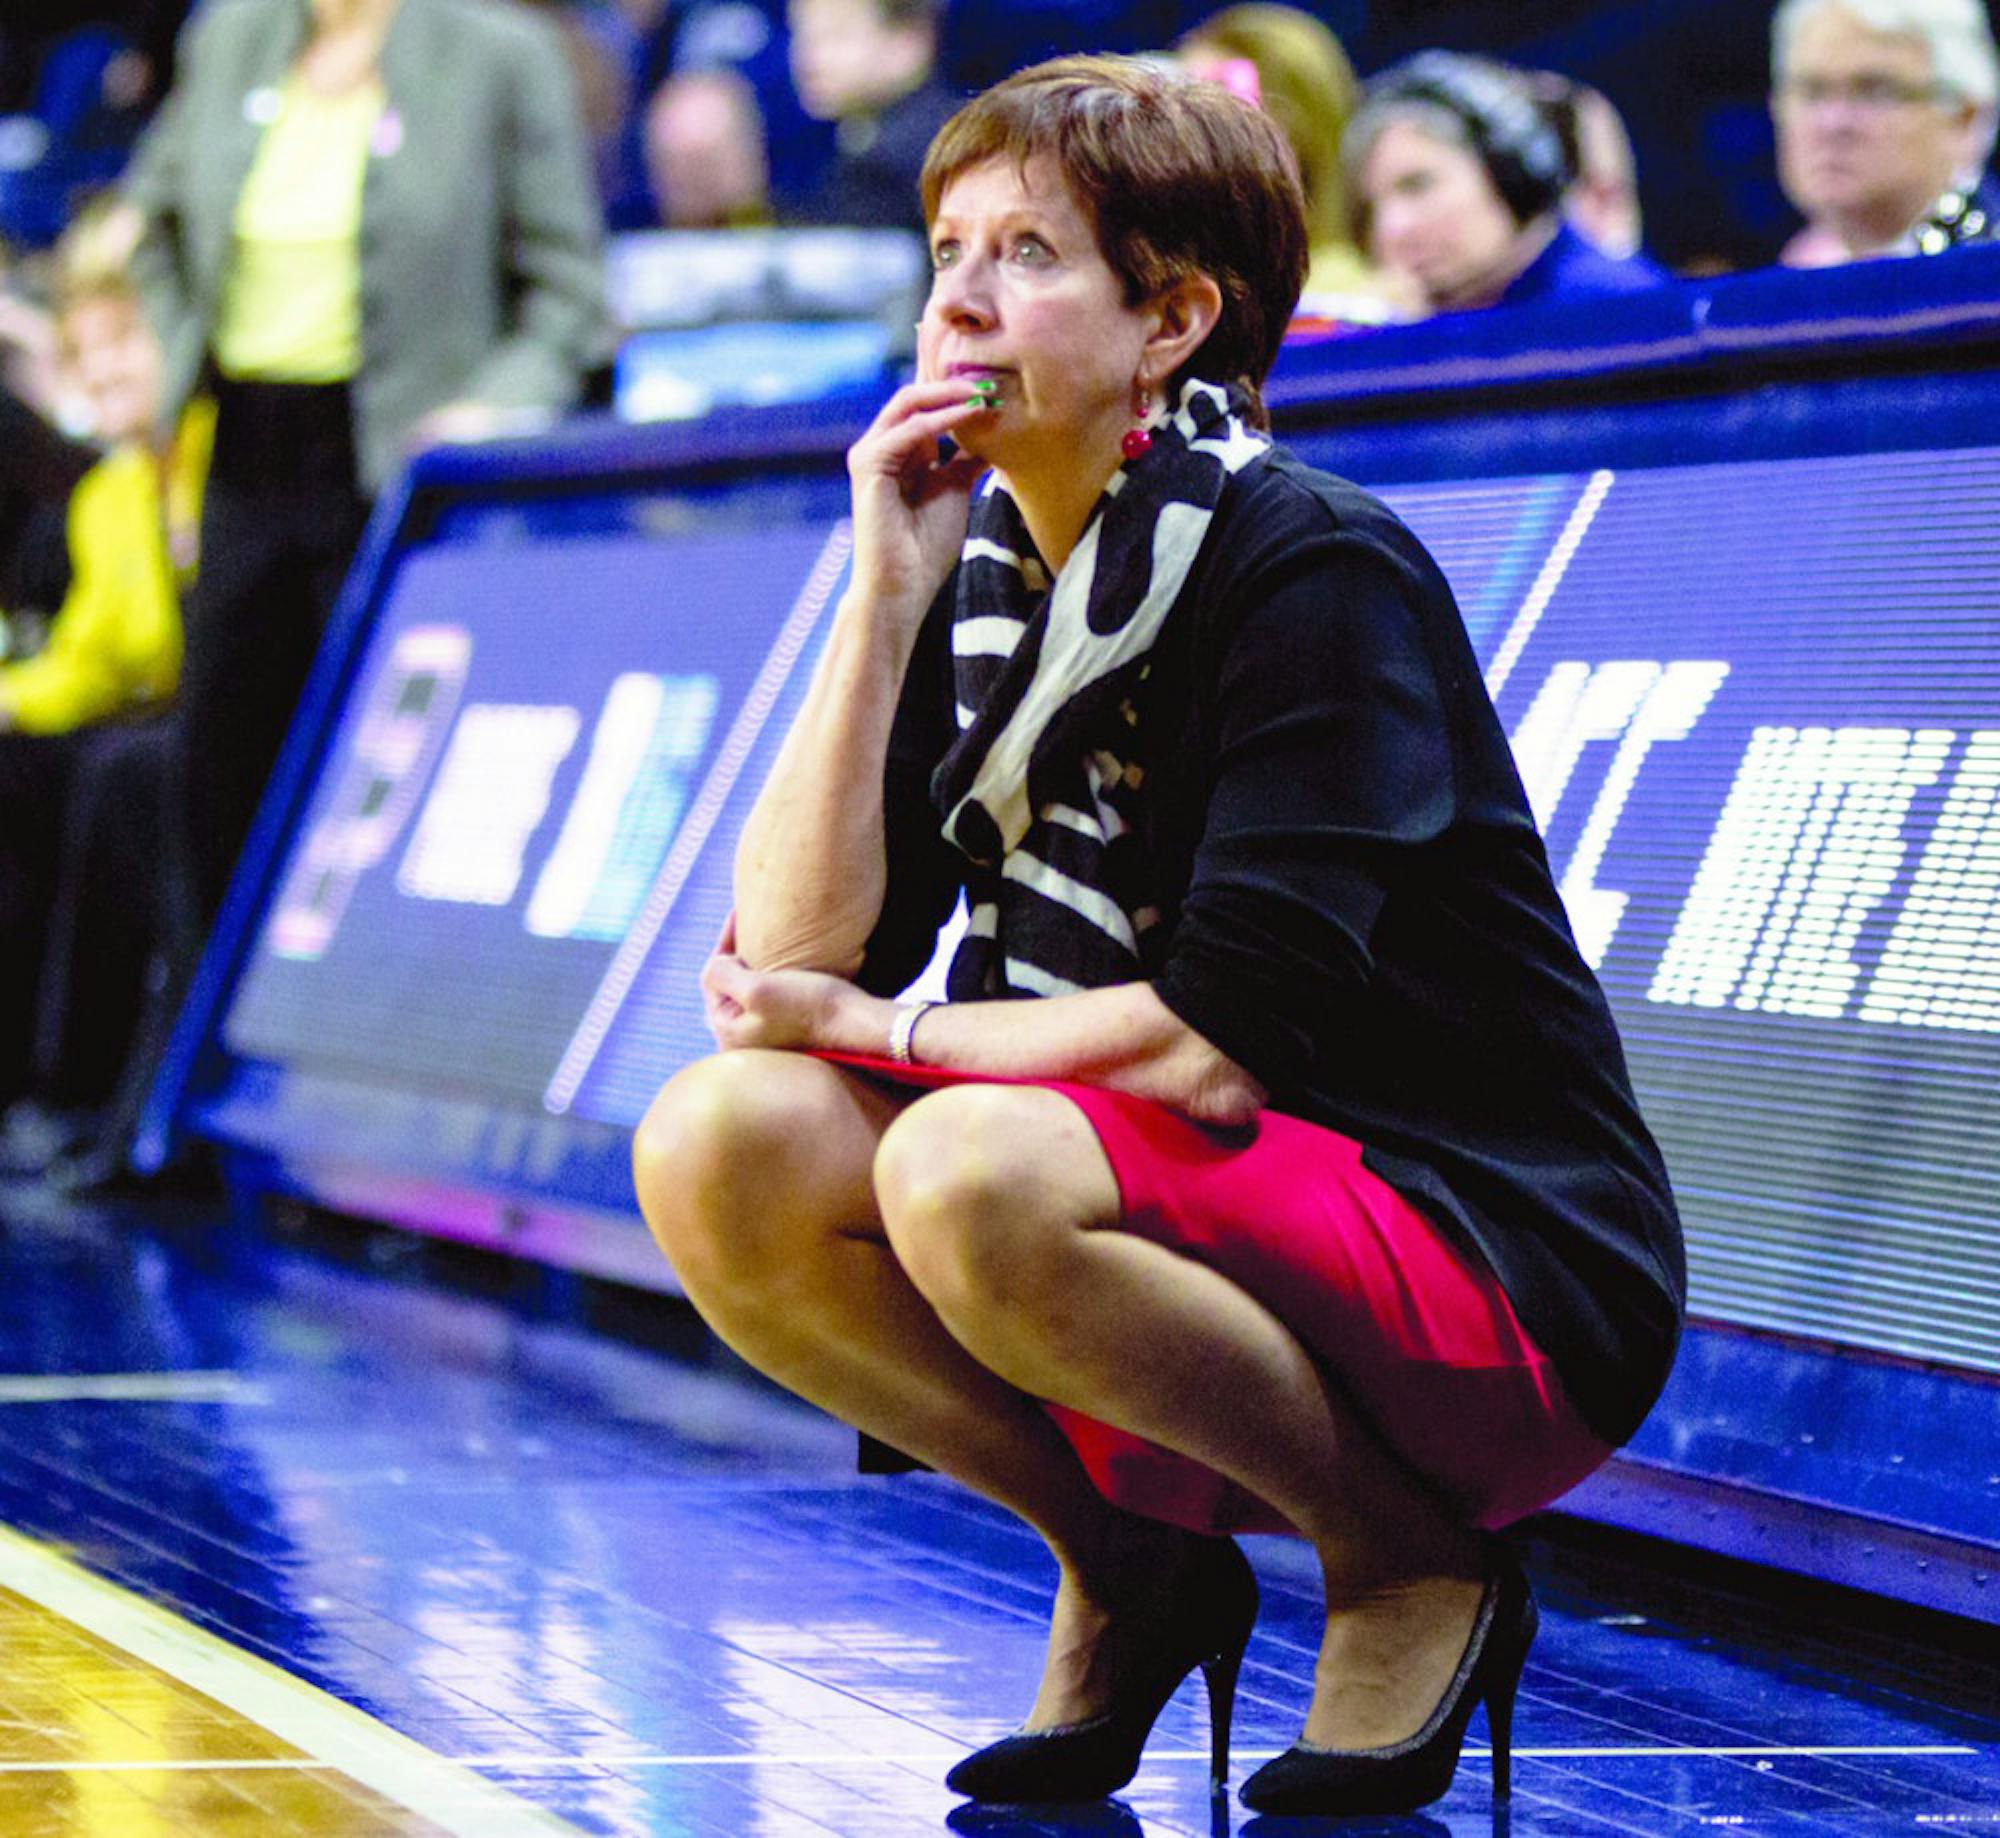 Irish head coach and Naismith Basketball Hall of Fame inductee Muffet McGraw crouches beside the court during Notre Dame’s 88-82 overtime win over Purdue on March 19 at Purcell Pavilion.